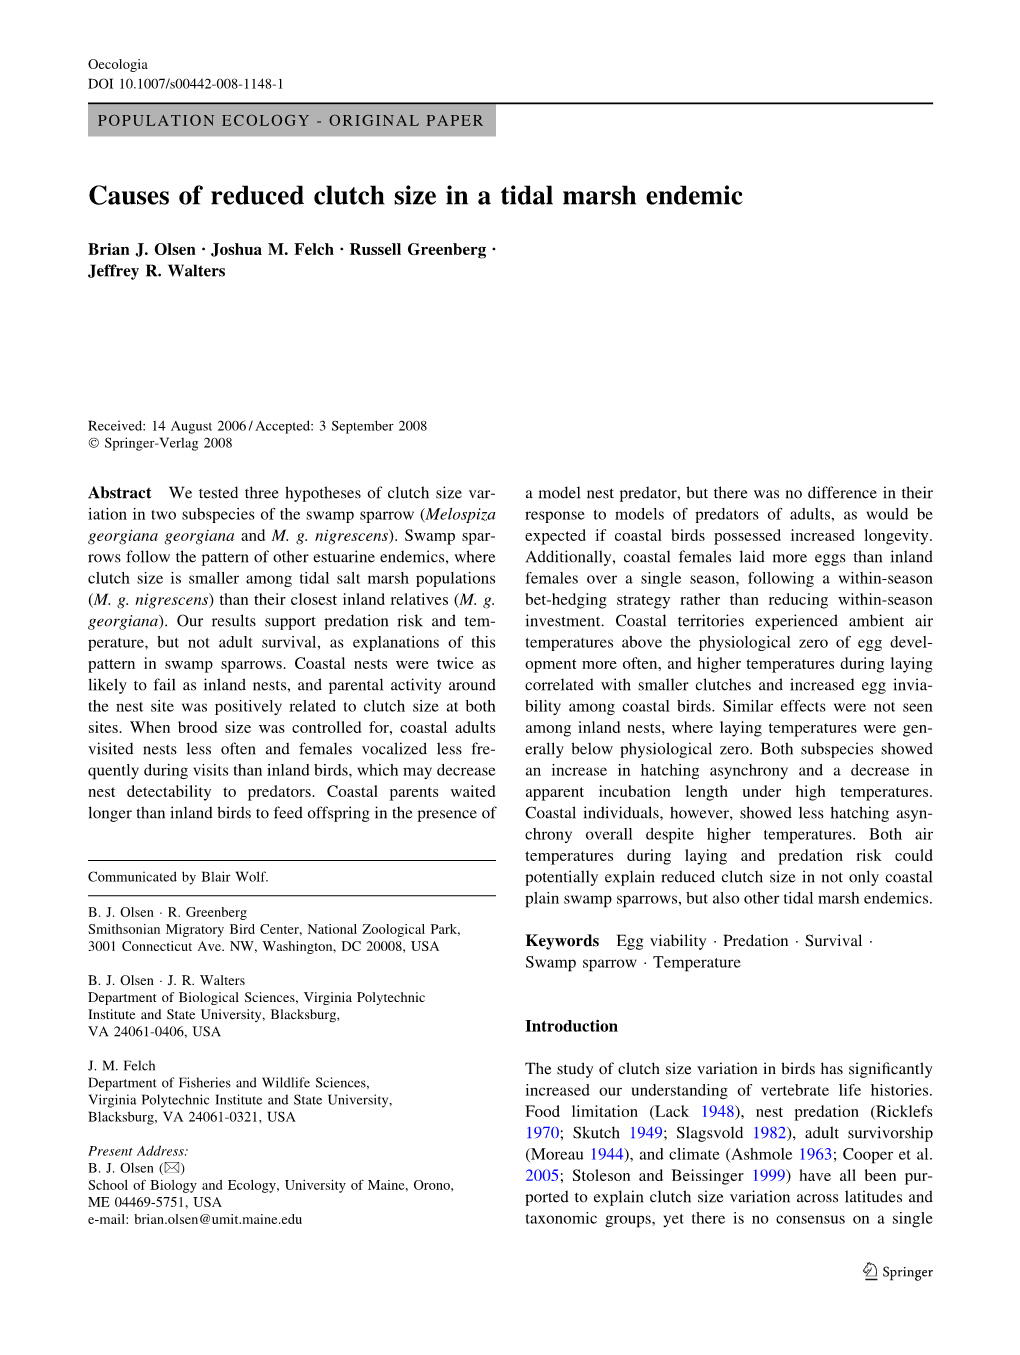 Causes of Reduced Clutch Size in a Tidal Marsh Endemic